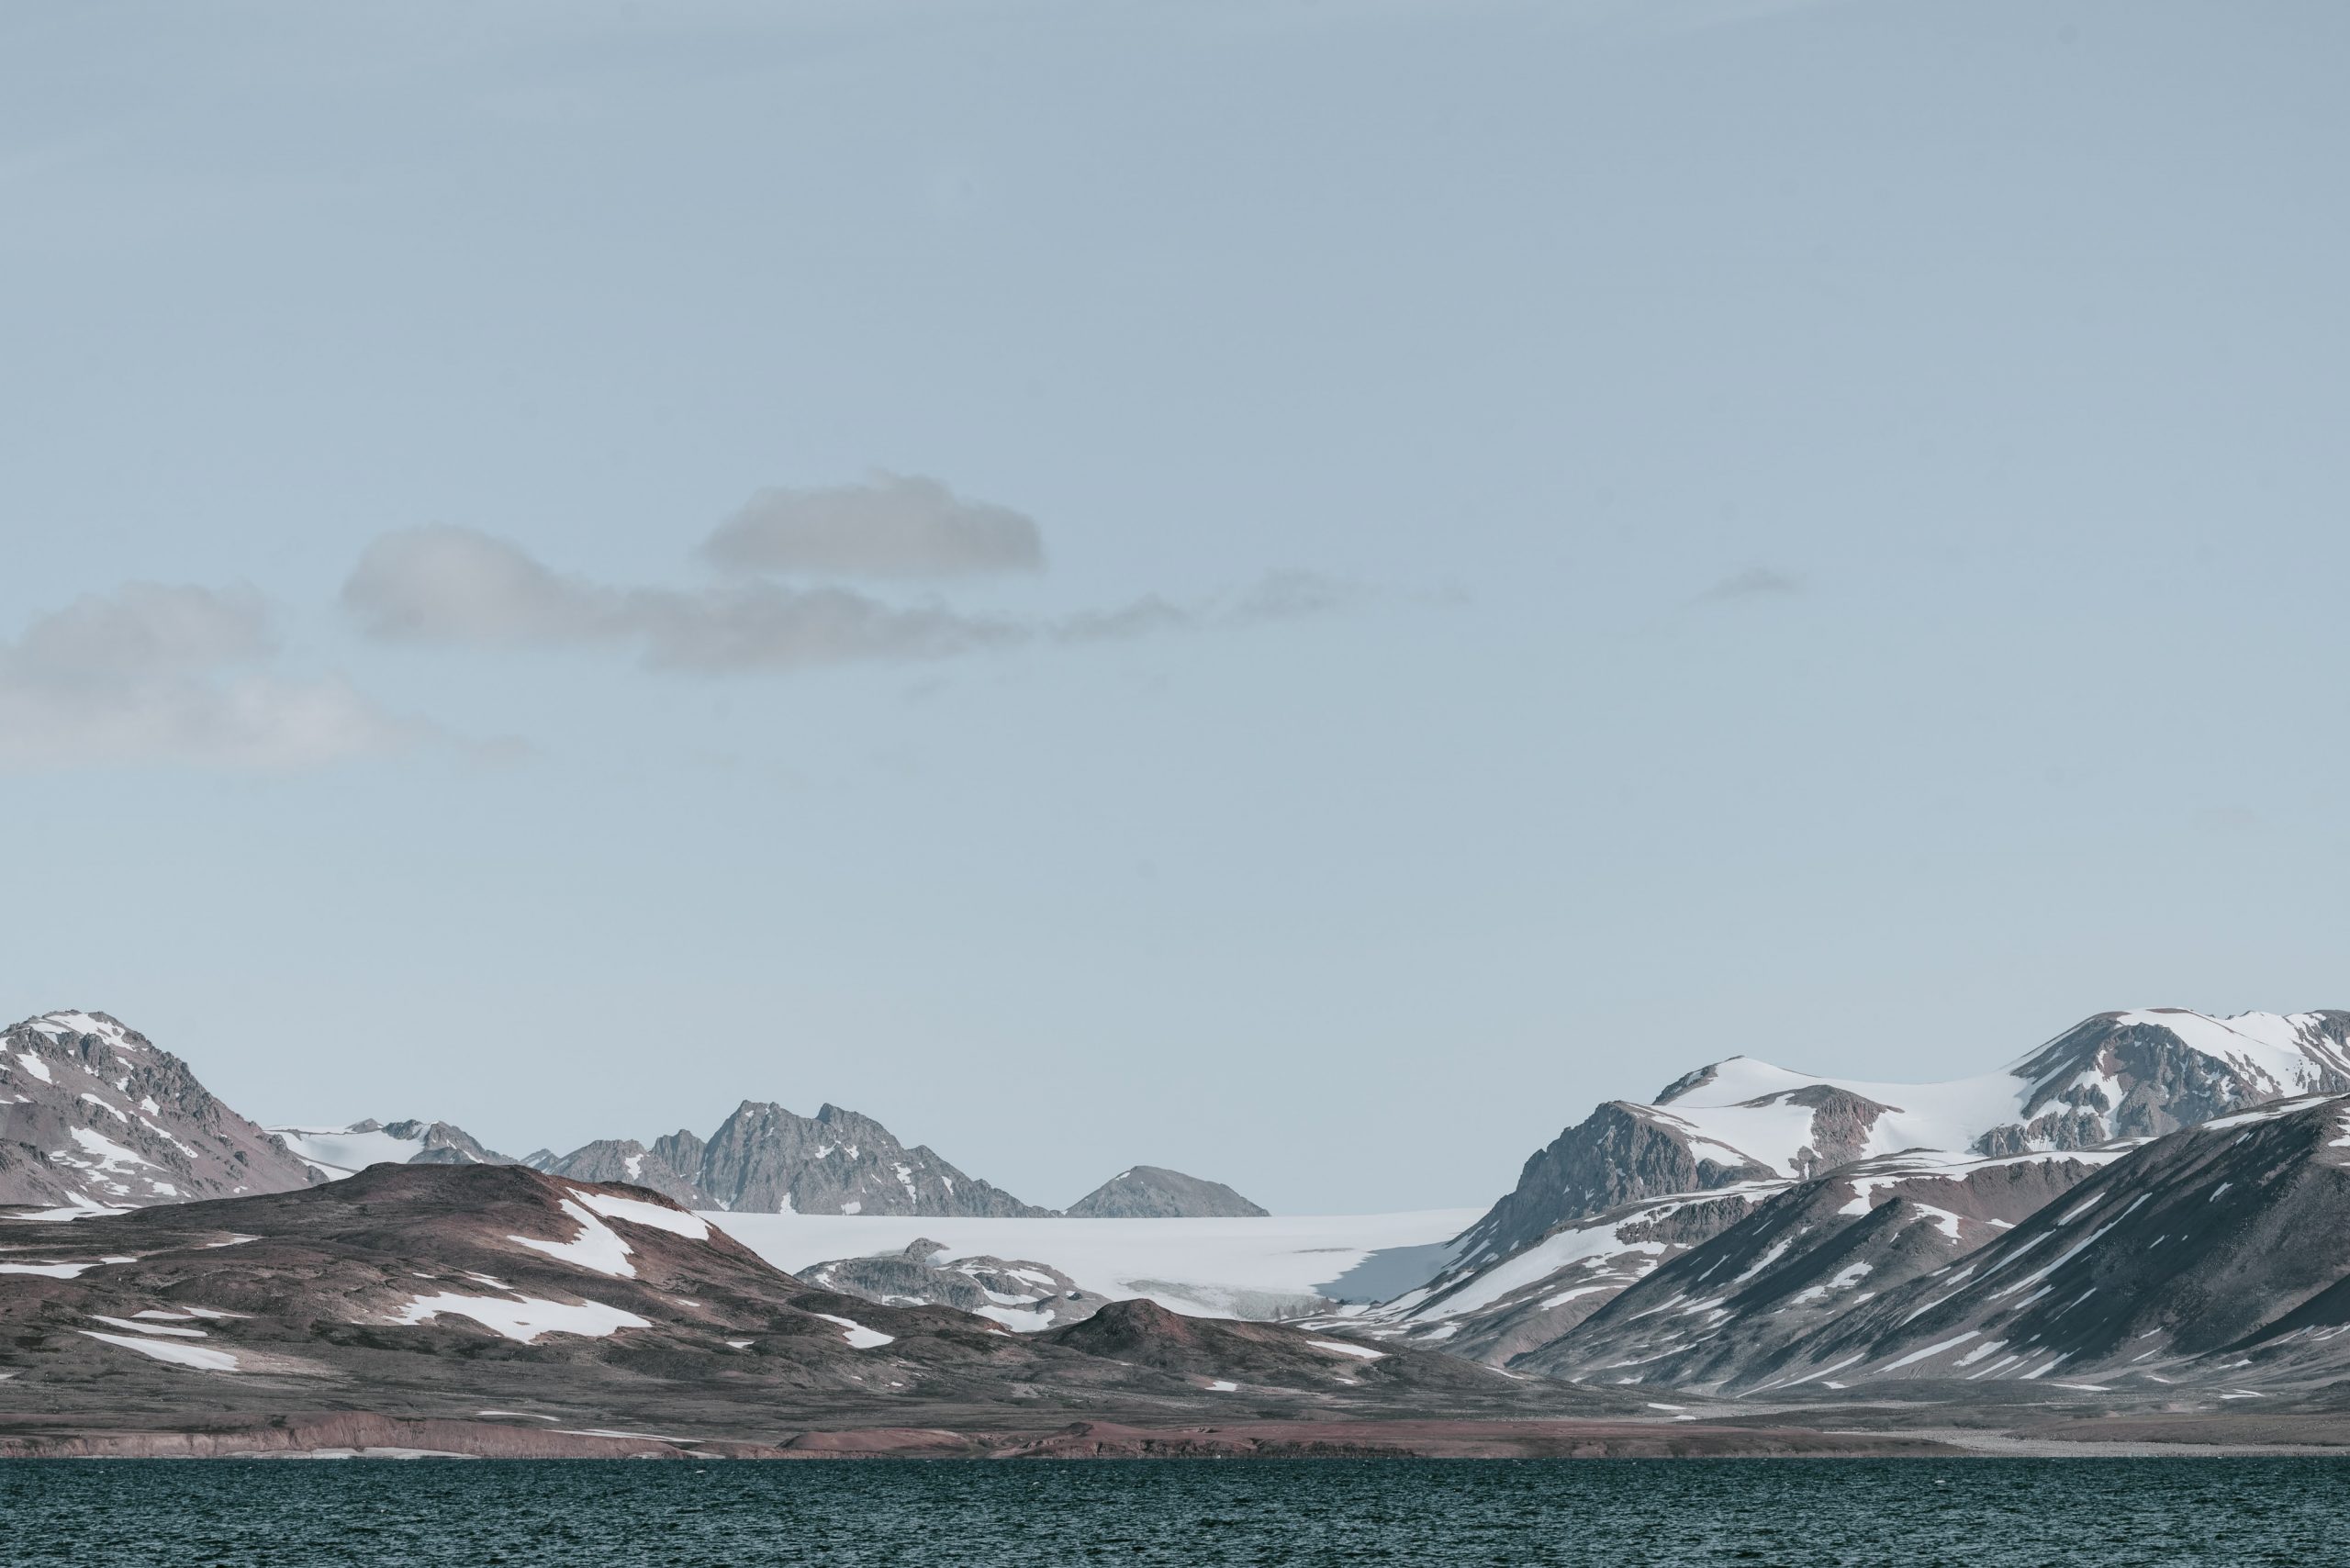 A photograph of a dark blue ocean with jagged, snow-dusted mountains in the background. The sky is a frosty blue with wisps of grey clouds in it.